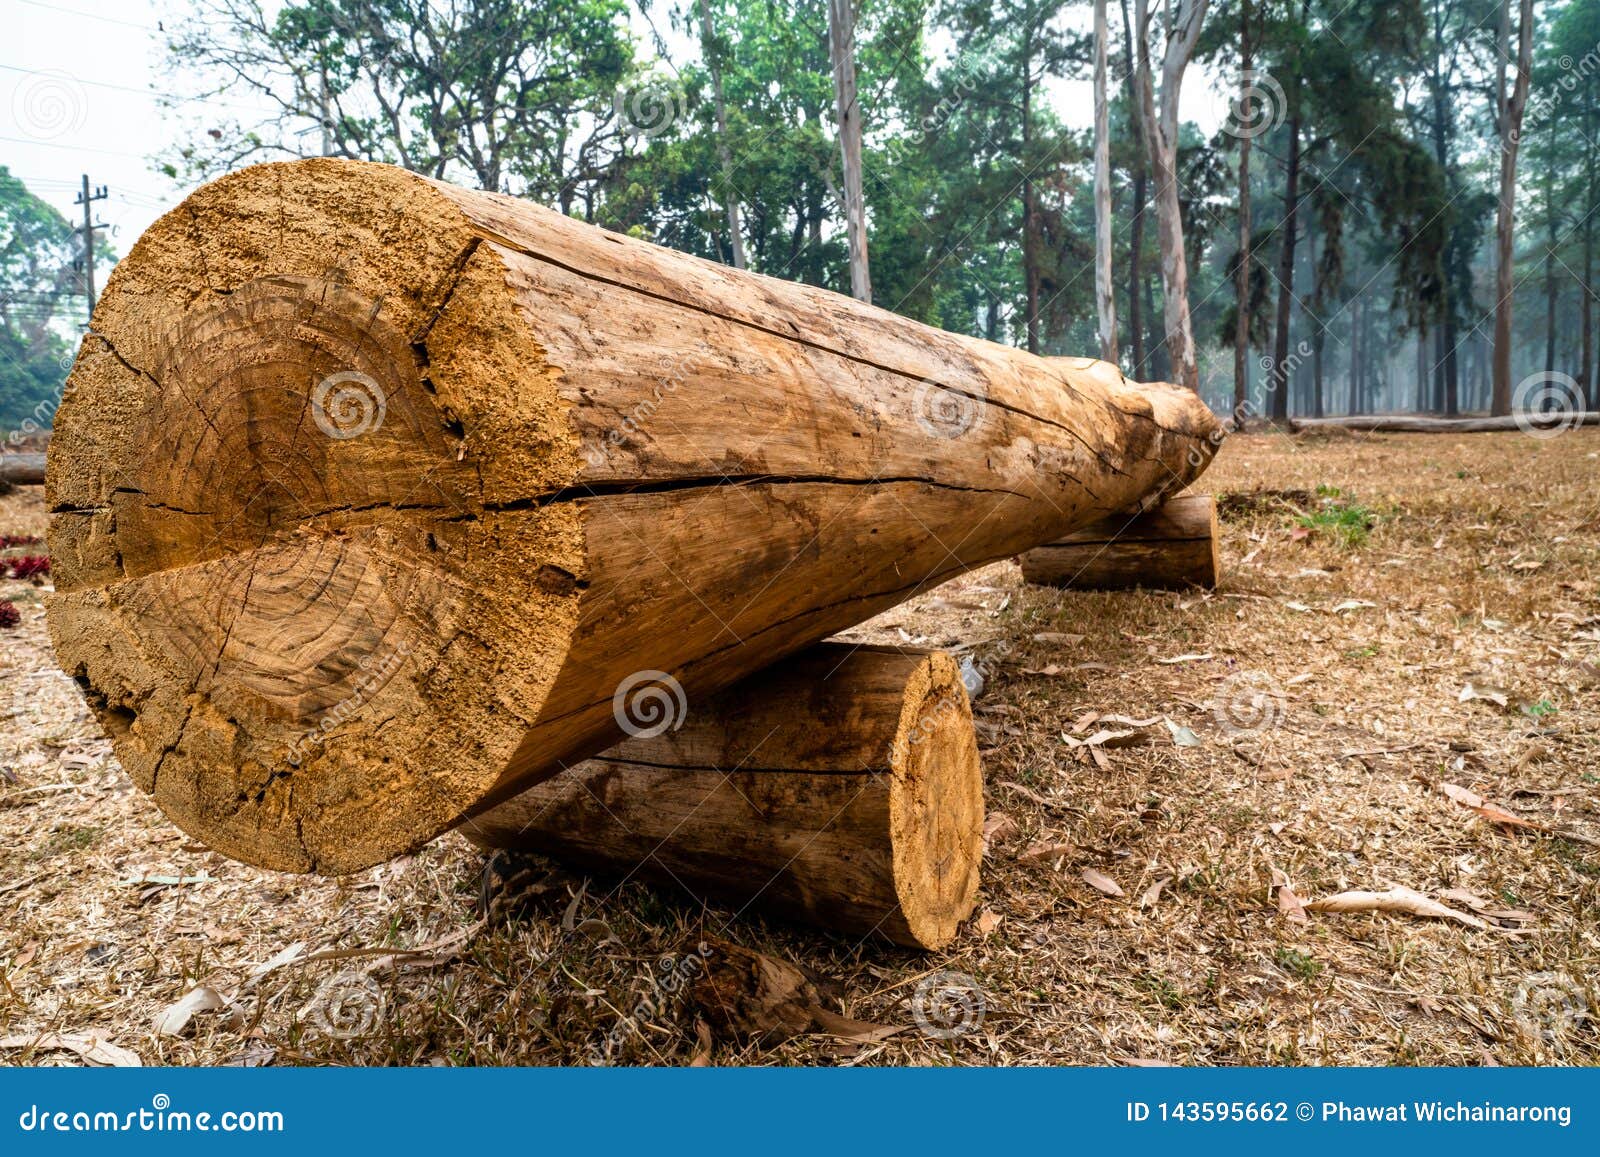 Annual ring wood cross section - Stock Photo [40383864] - PIXTA